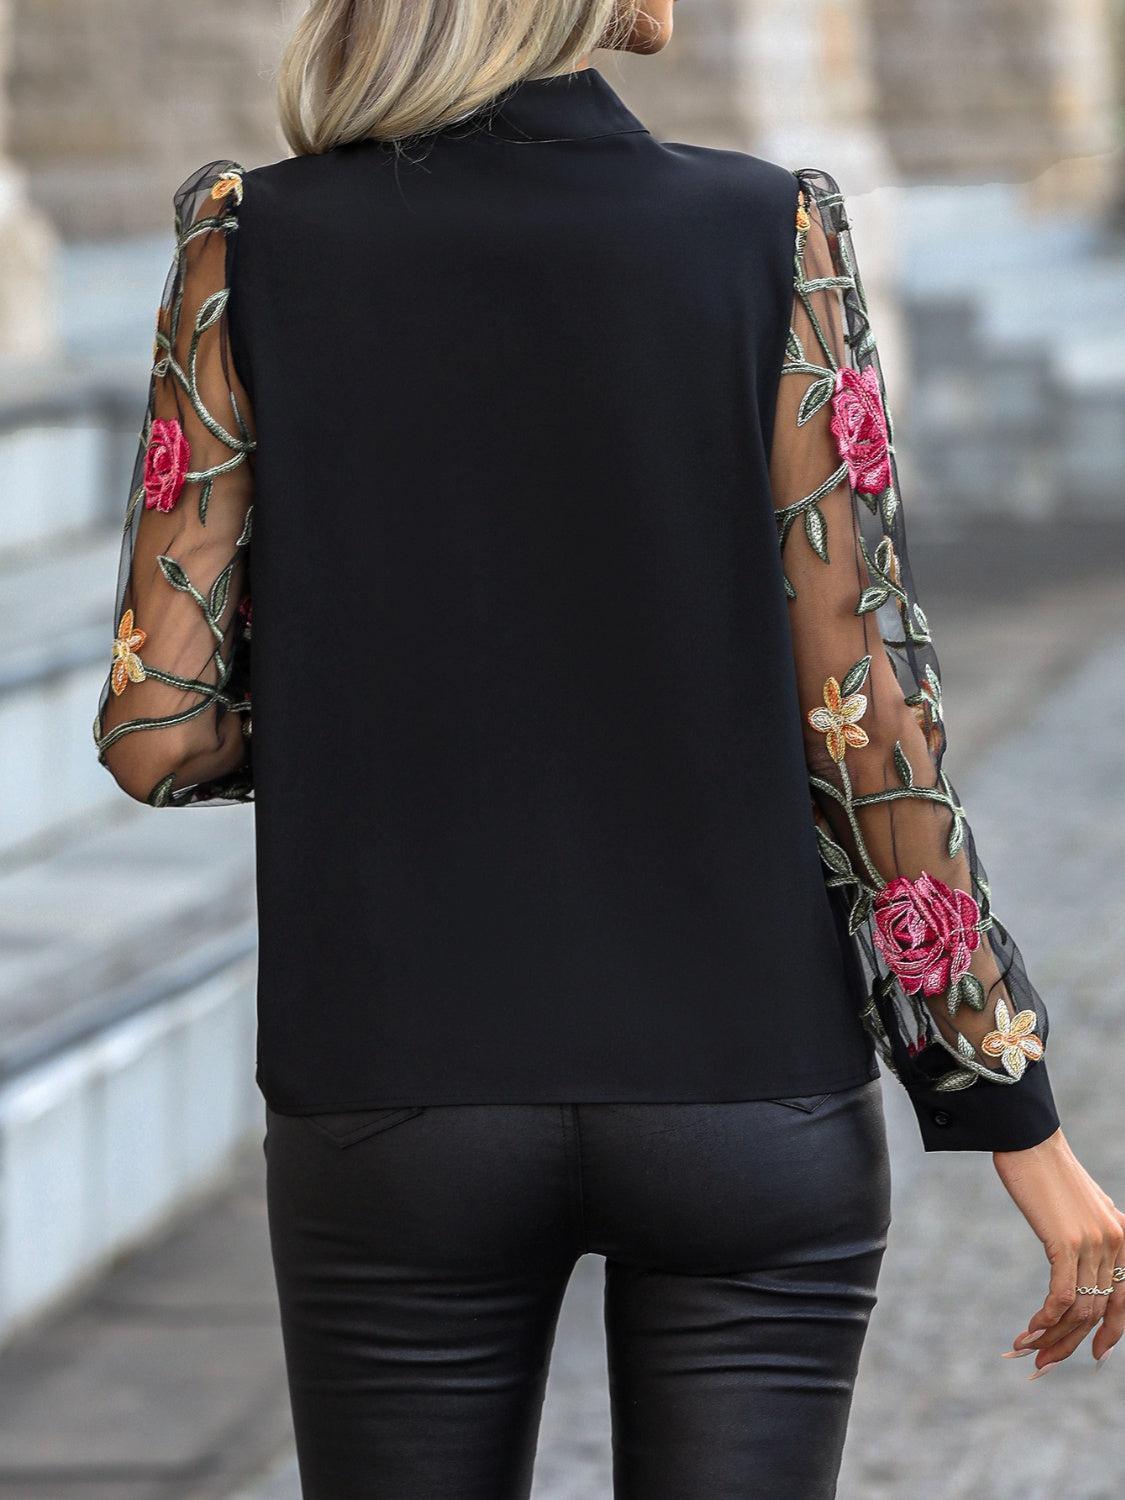 a woman wearing a black top with flowers on it